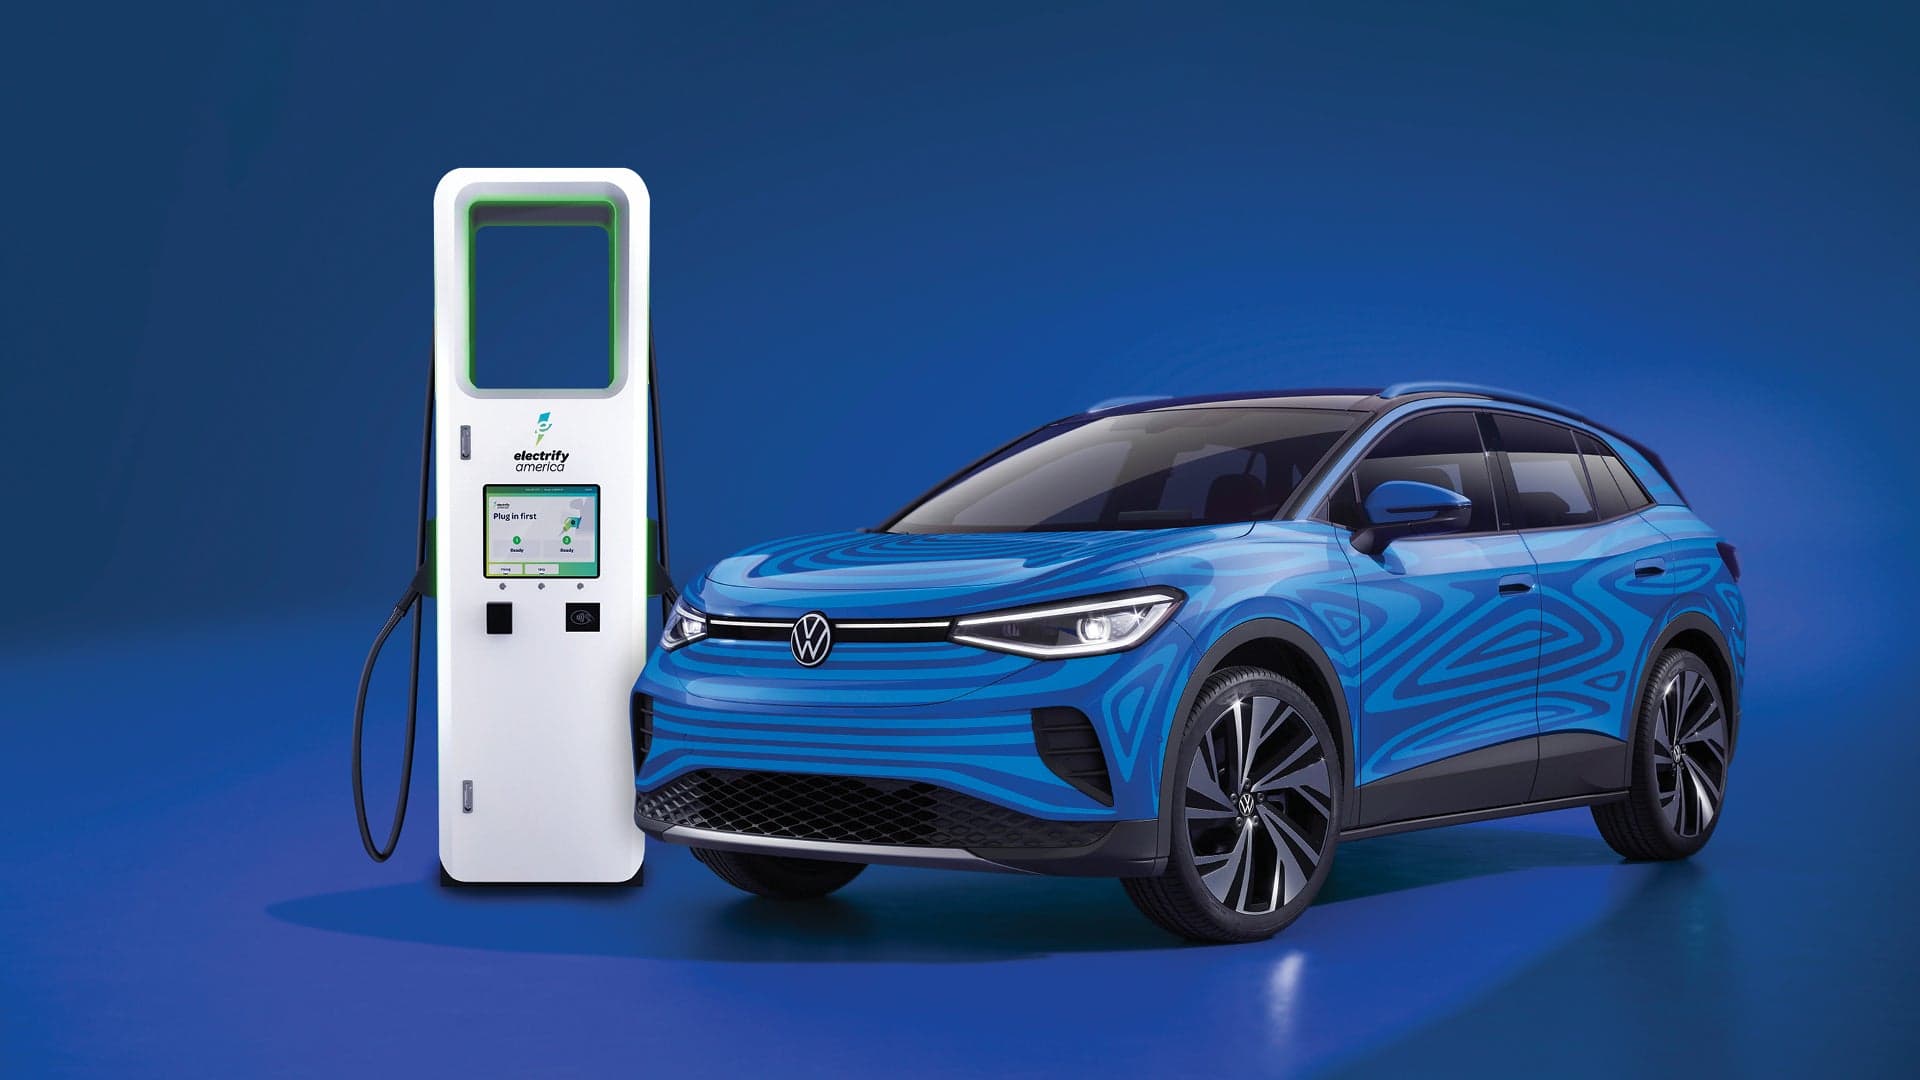 2021 Volkswagen ID.4 Buyers Will Get Three Years of Free Fast Charging